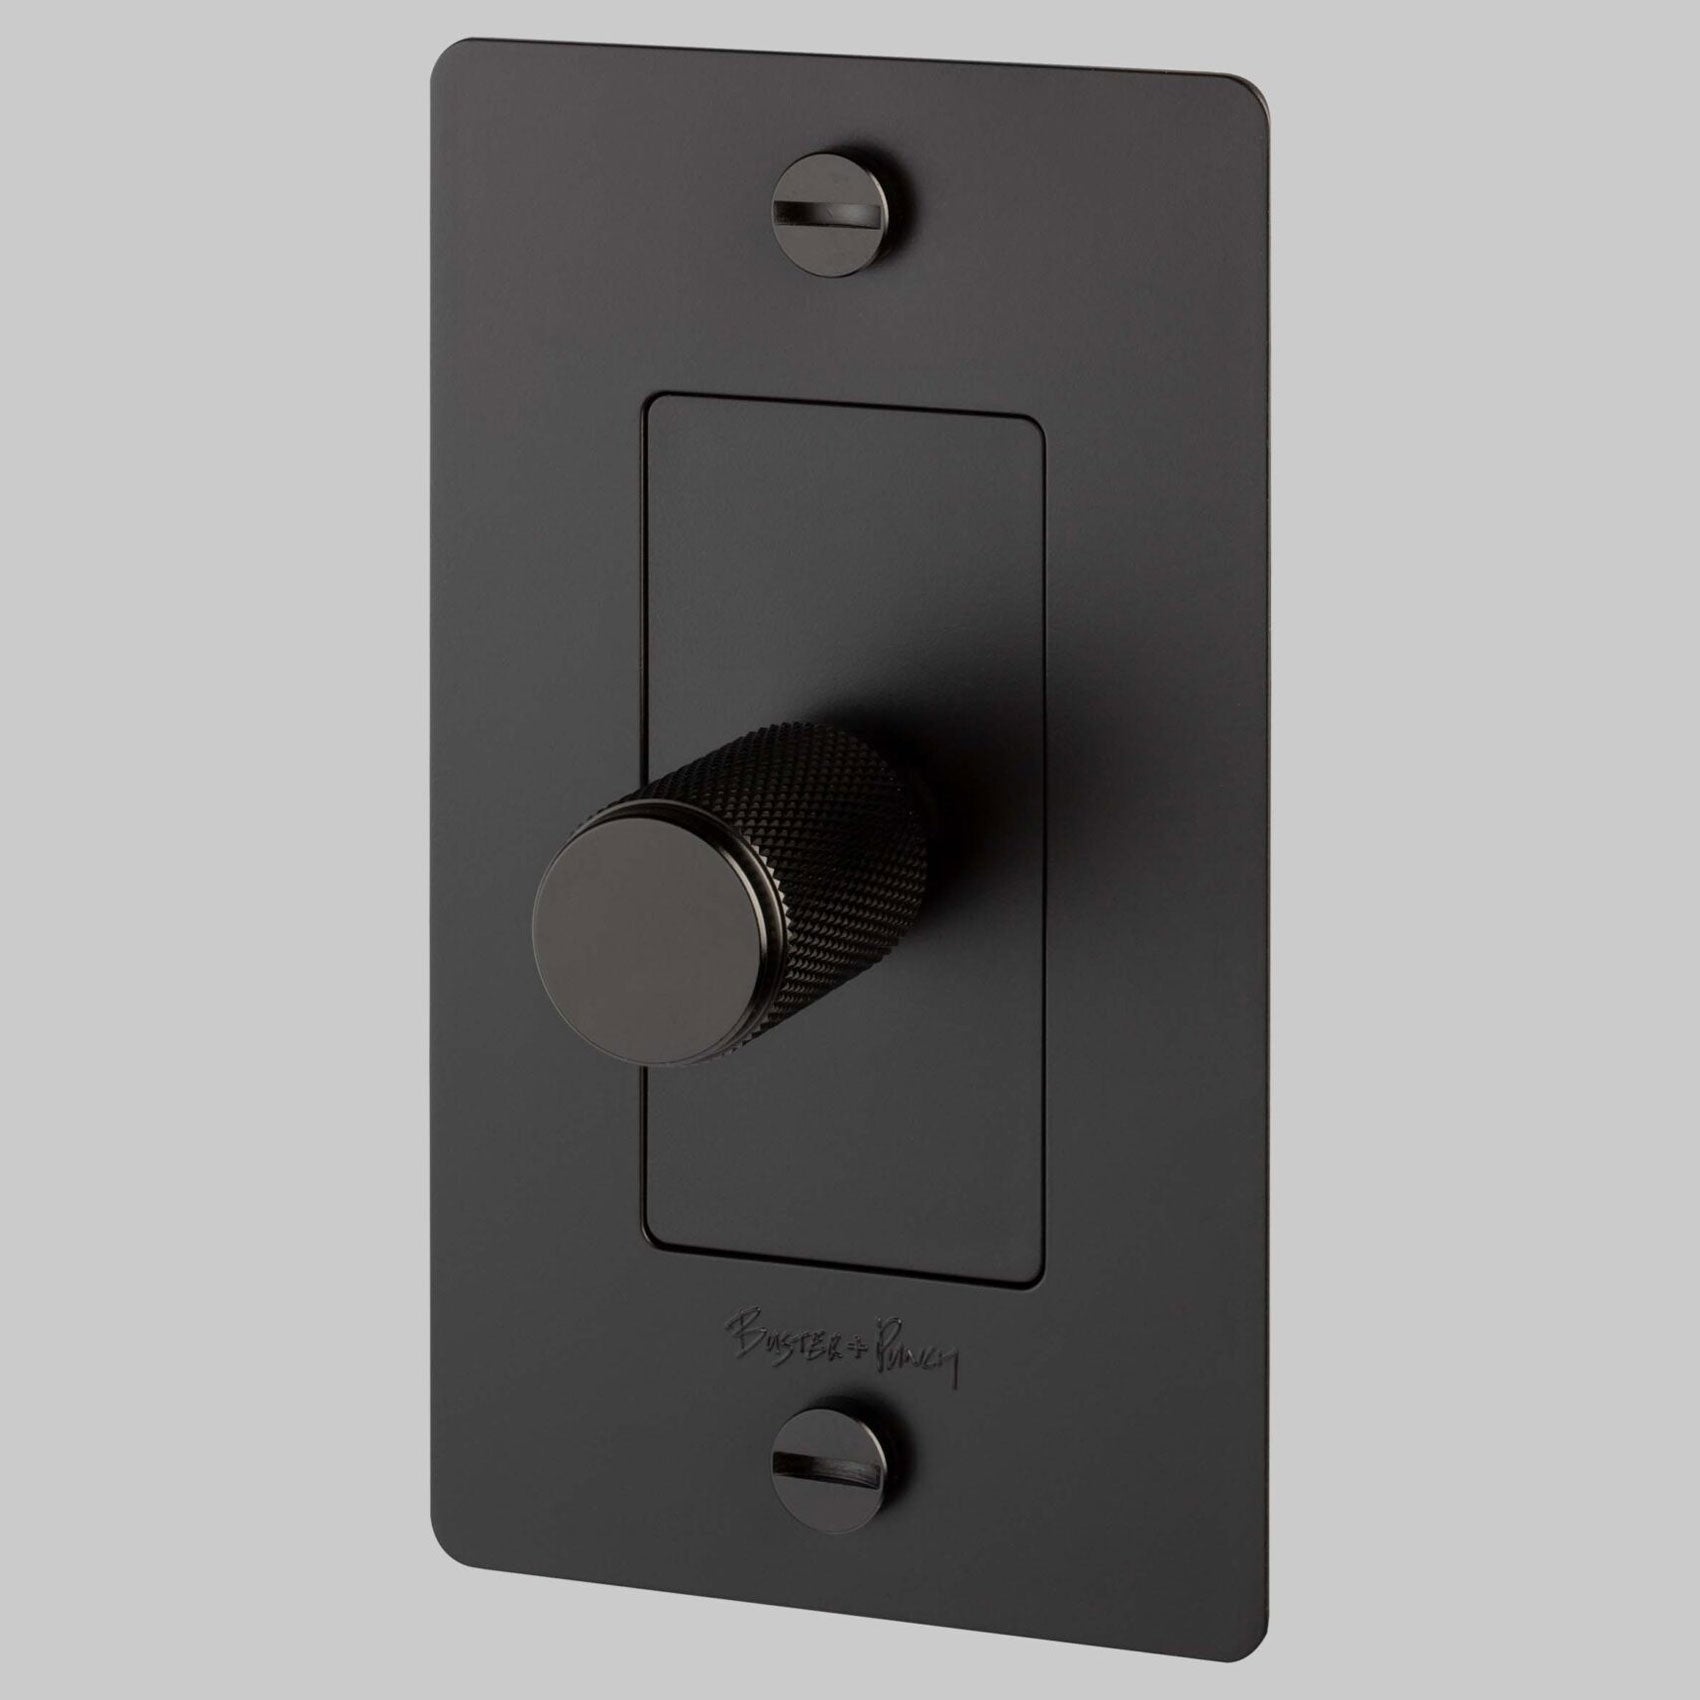 Buster + Punch 1 Gang Dimmer Complete l Polycarbonate Lighting Controls Buster + Punch Black Polycarbonate 